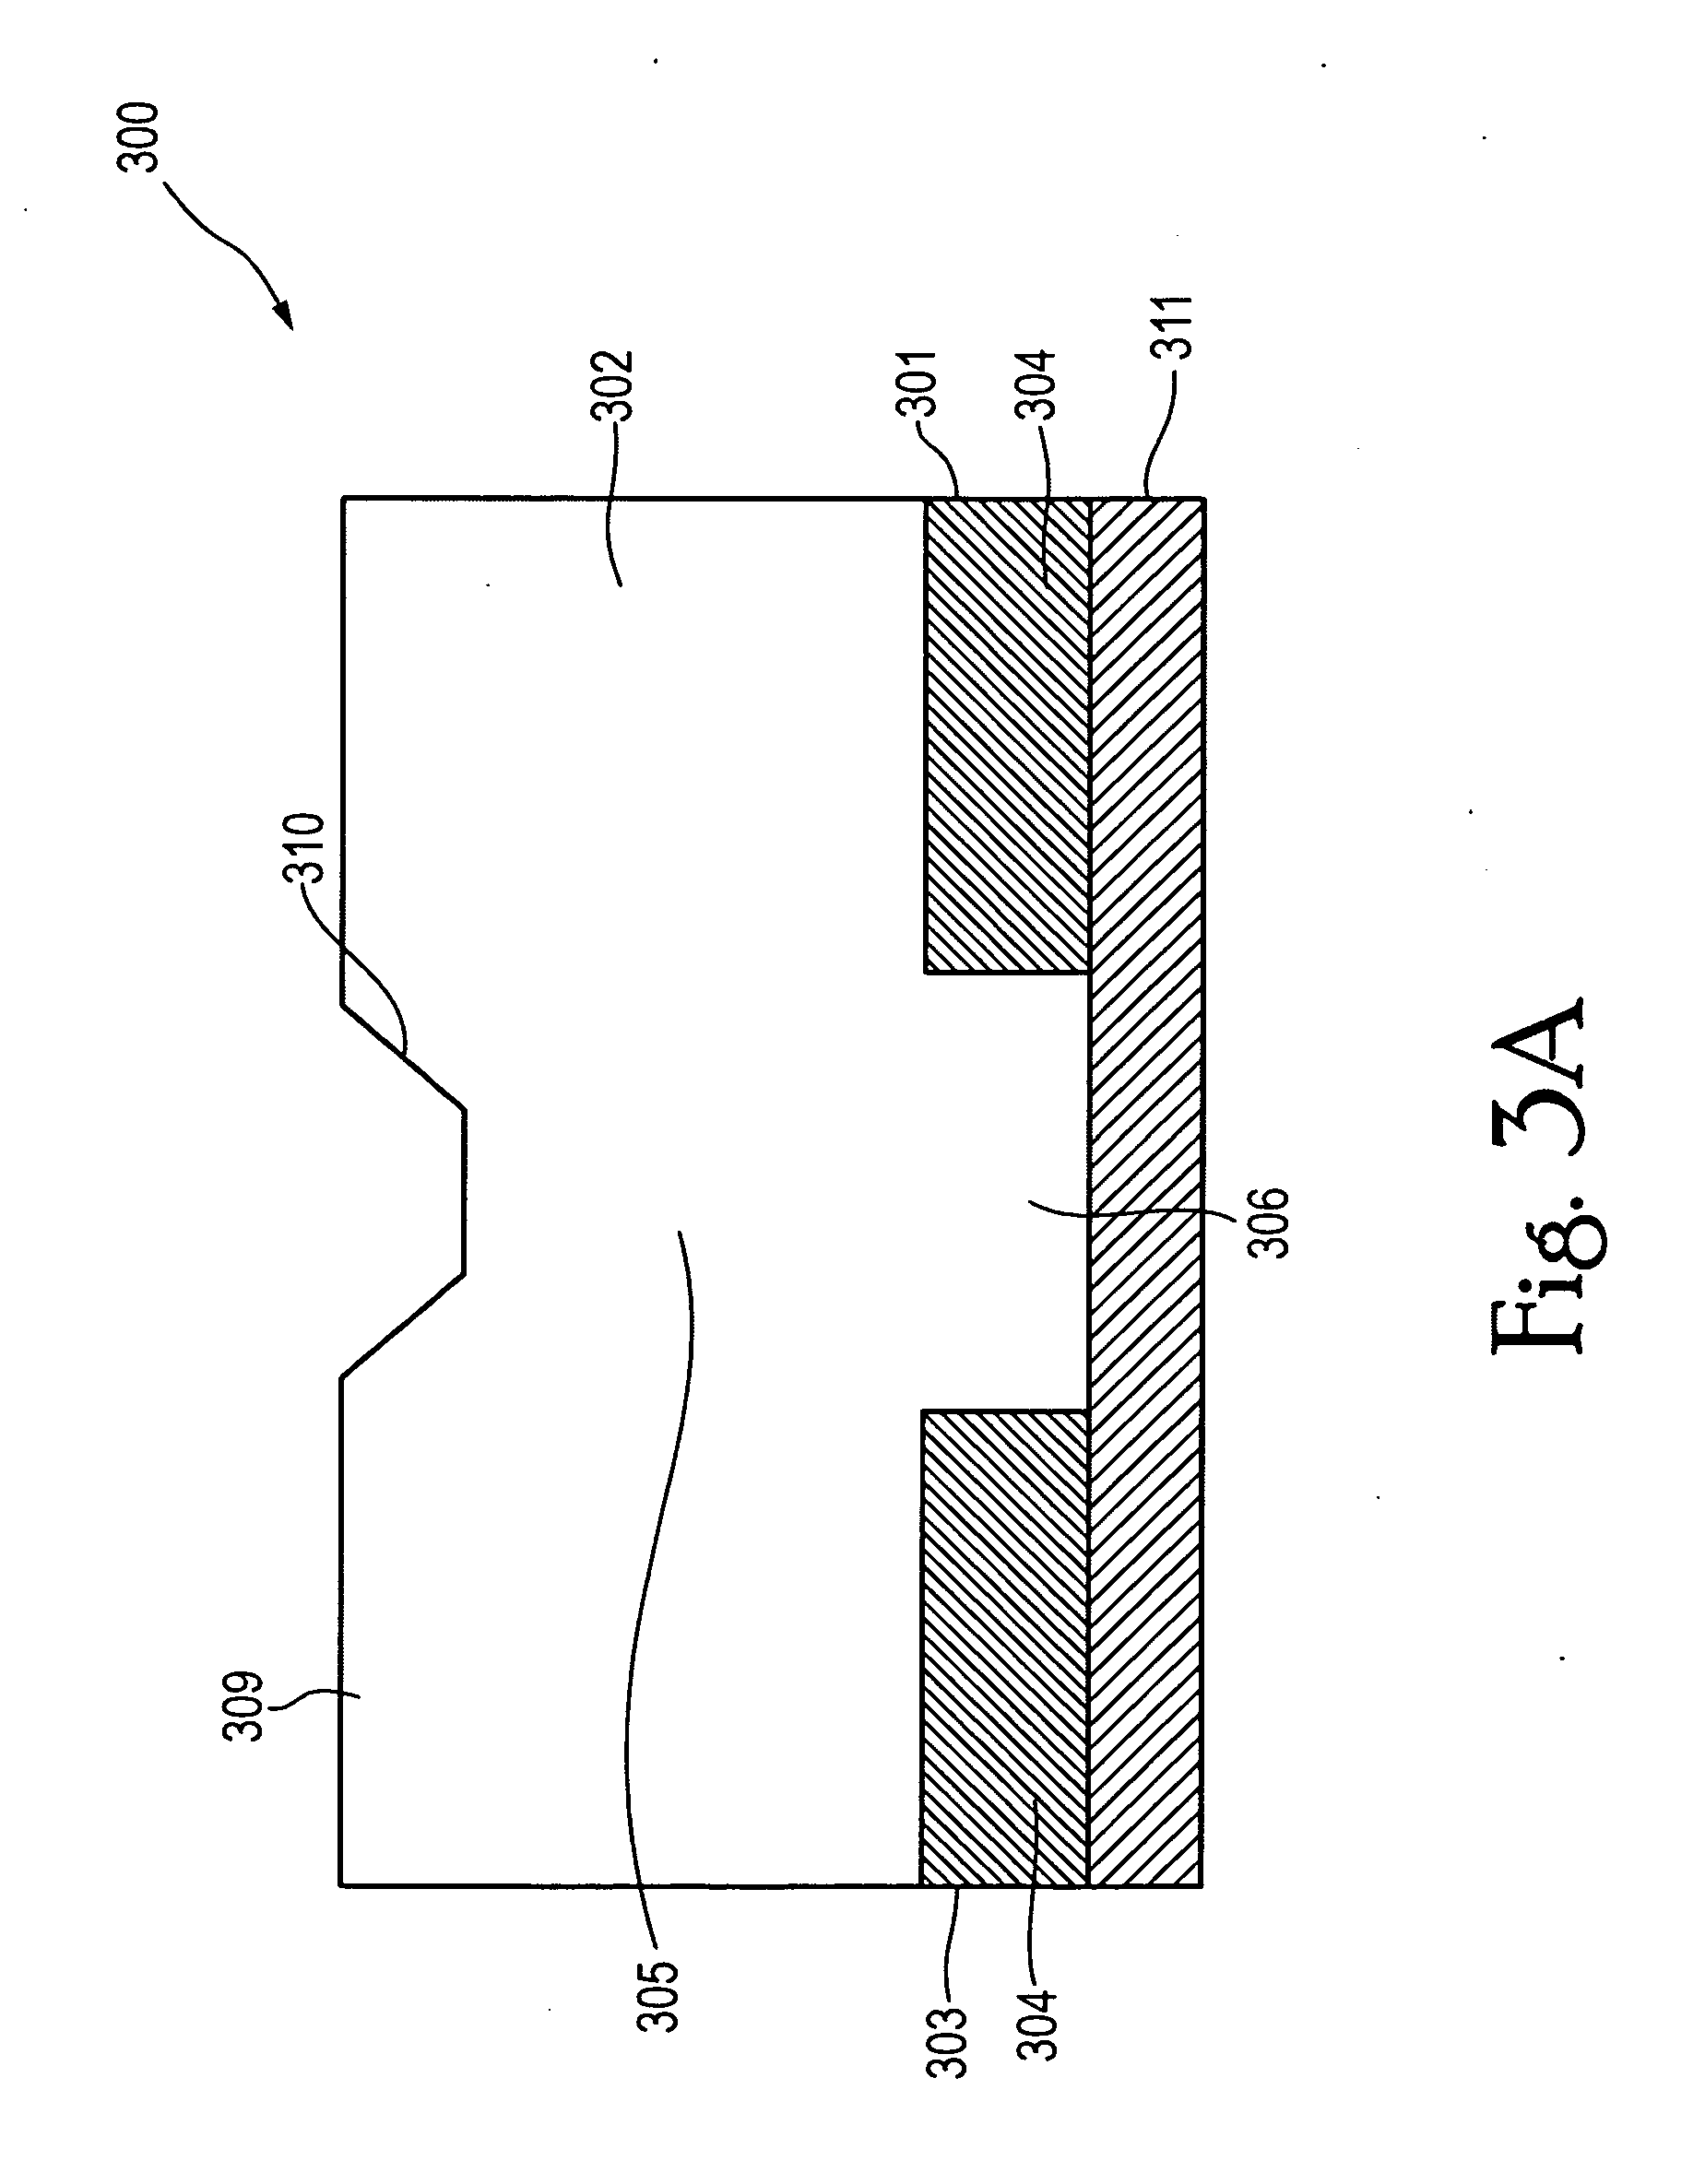 Method and system for enhanced lithographic alignment